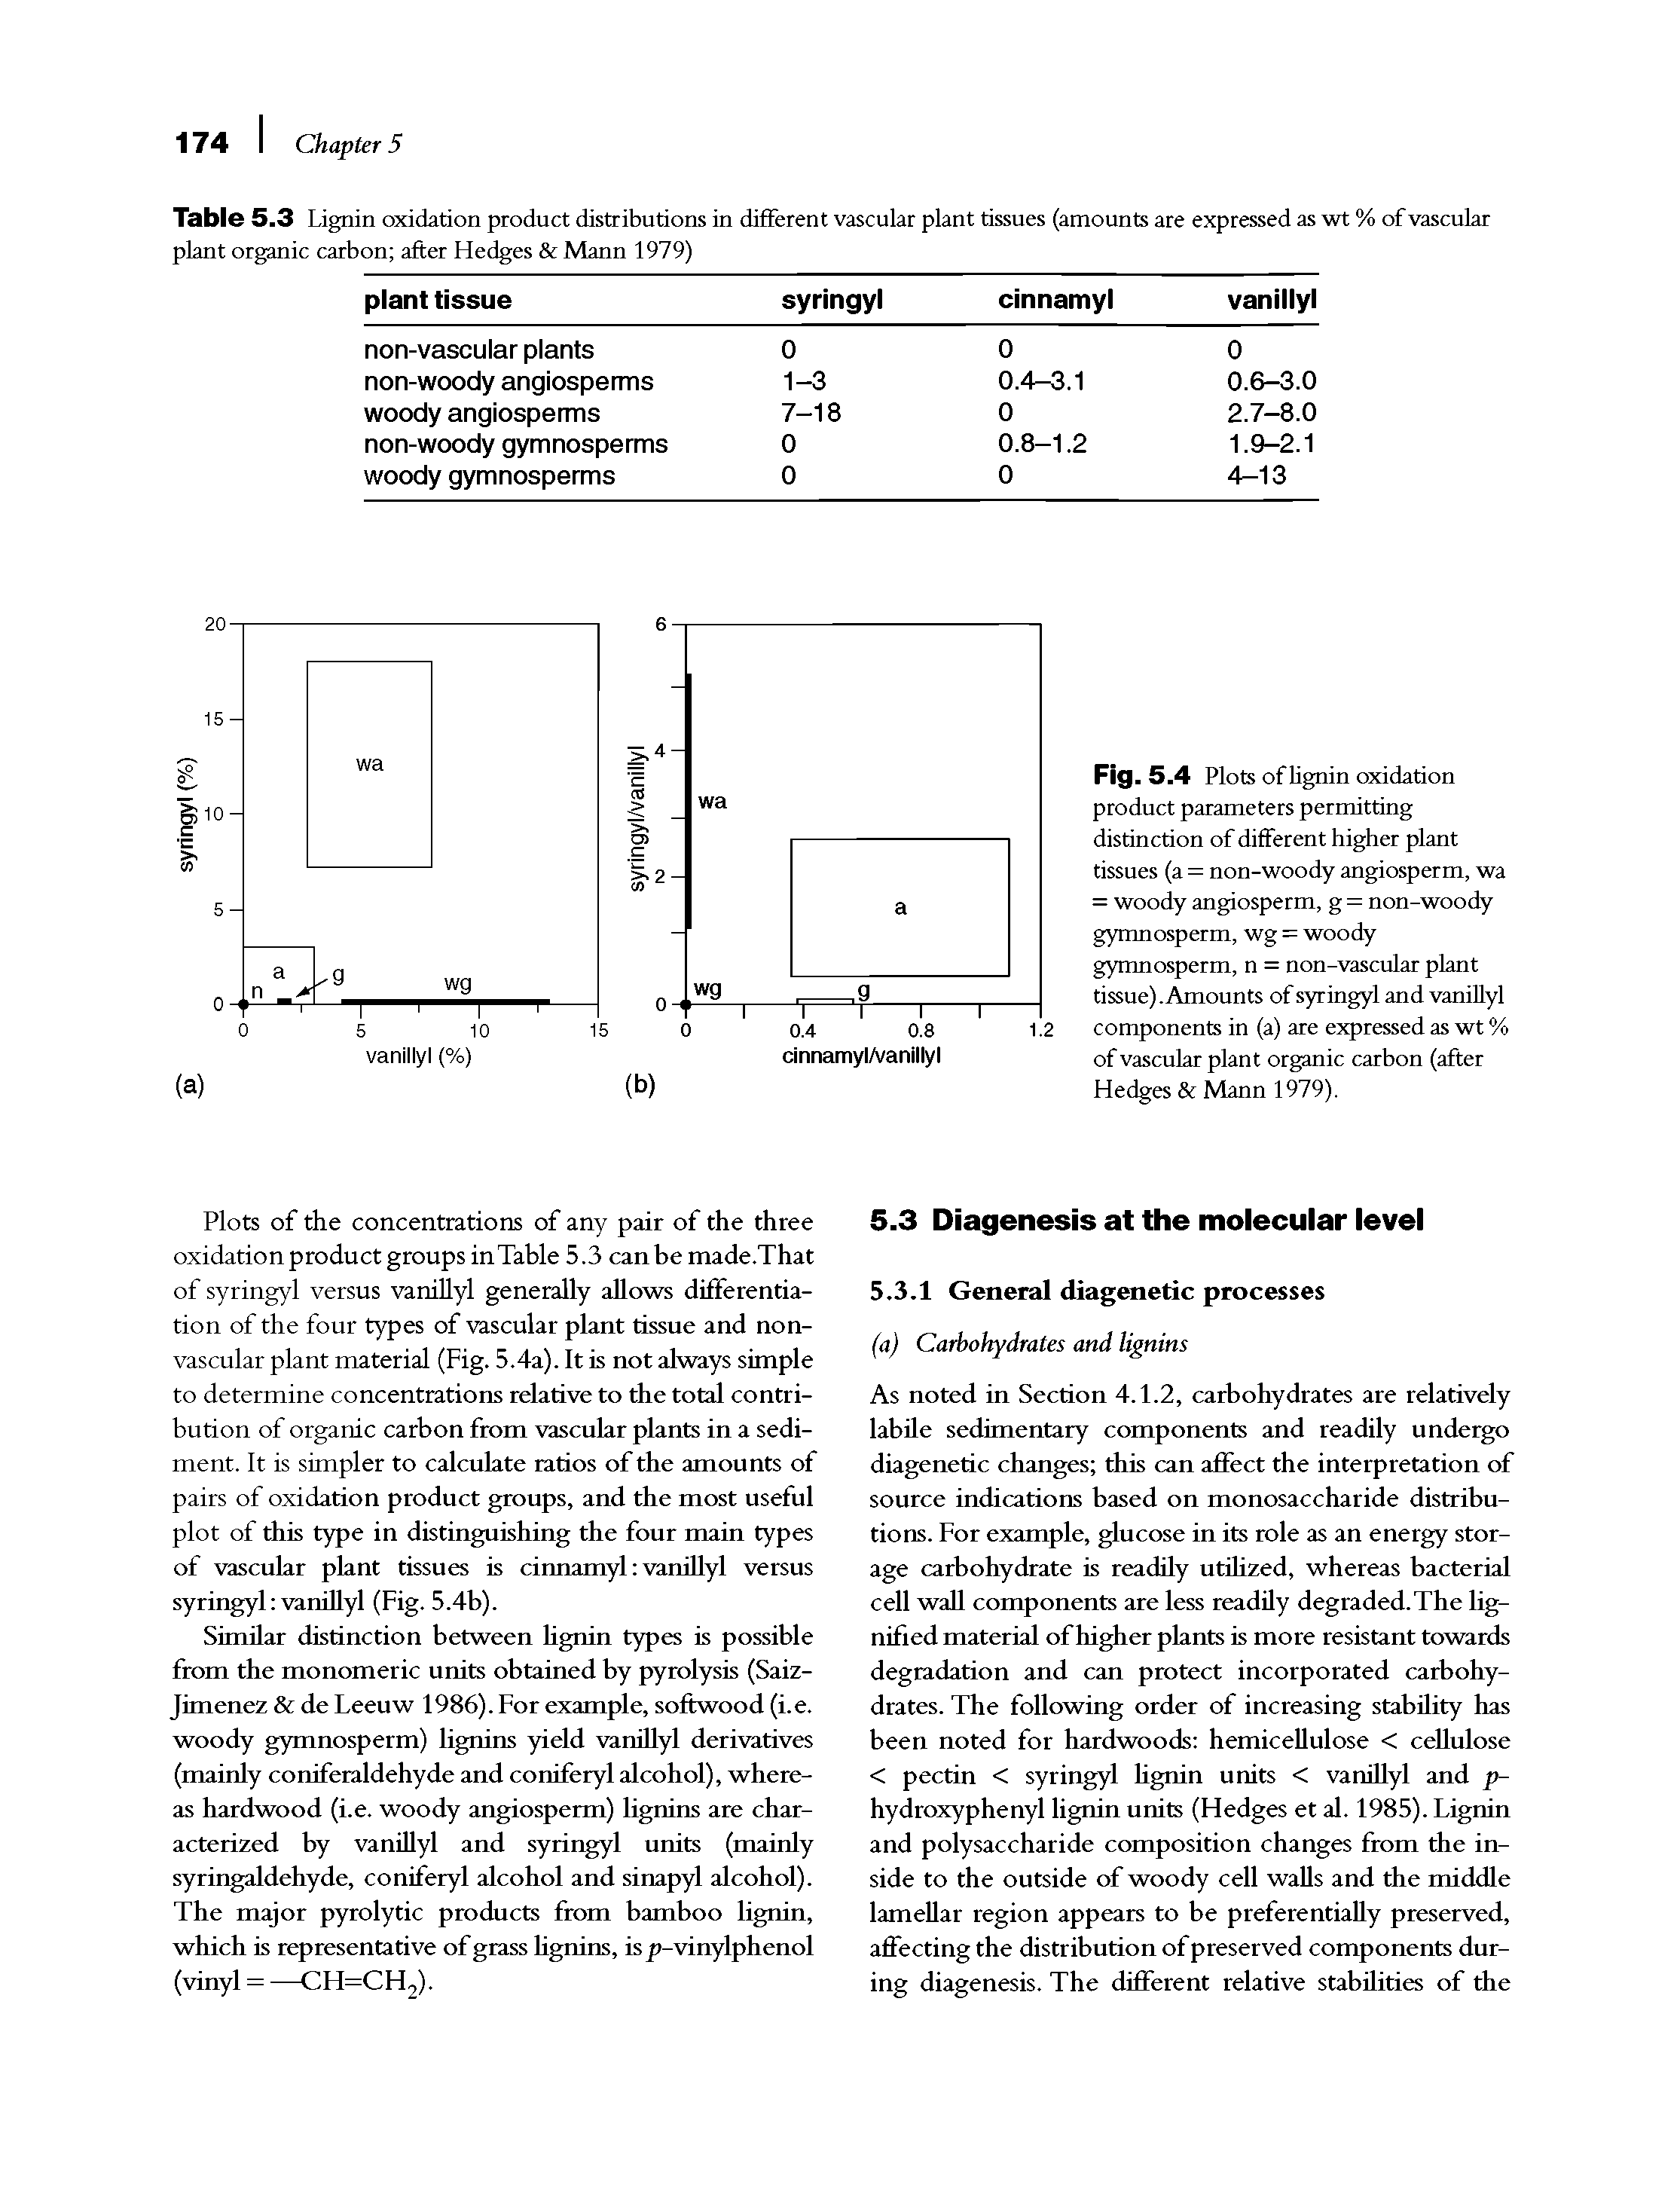 Fig. 5.4 Plots of lignin oxidation product parameters permitting distinction of different higher plant tissues (a = non-woody angiosperm, wa = woody angiosperm, g = non-woody gymnosperm, wg = woody gymnosperm, n = non-vascular plant tissue).Amounts of syringyl and vanillyl components in (a) are expressed as wt % of vascular plant organic carbon (after Hedges Mann 1979).